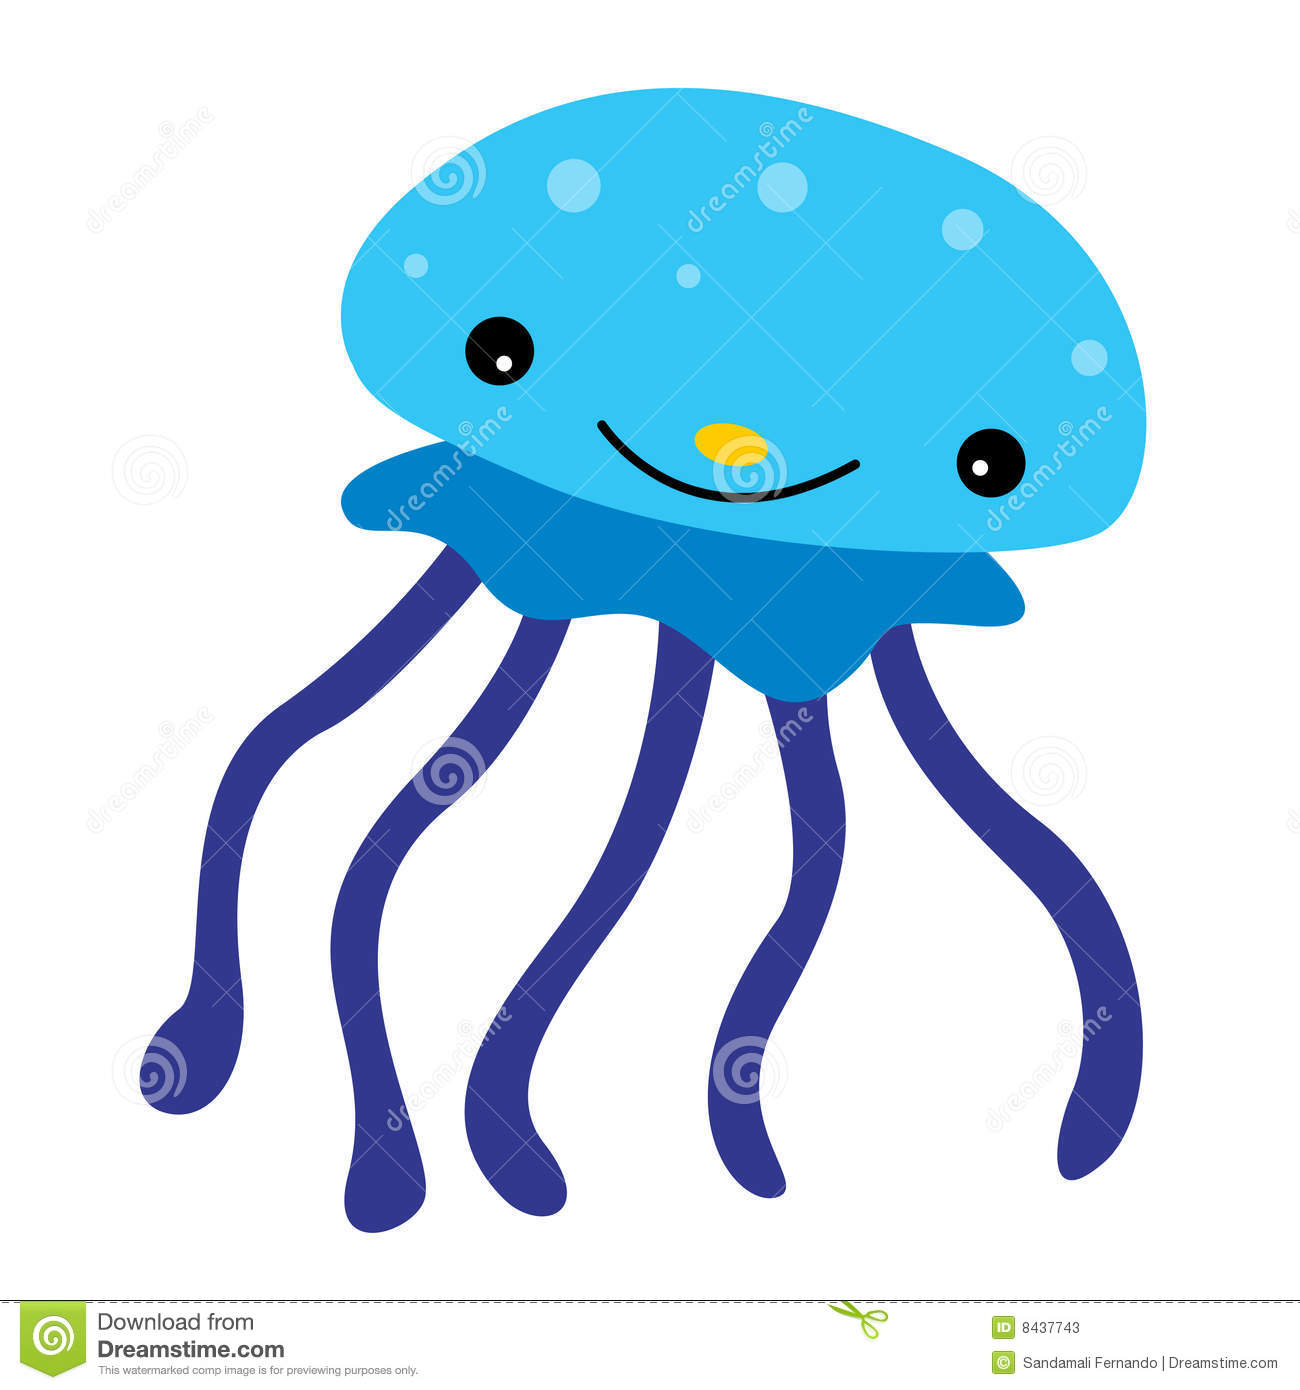 Jellyfish clipart #15, Download drawings